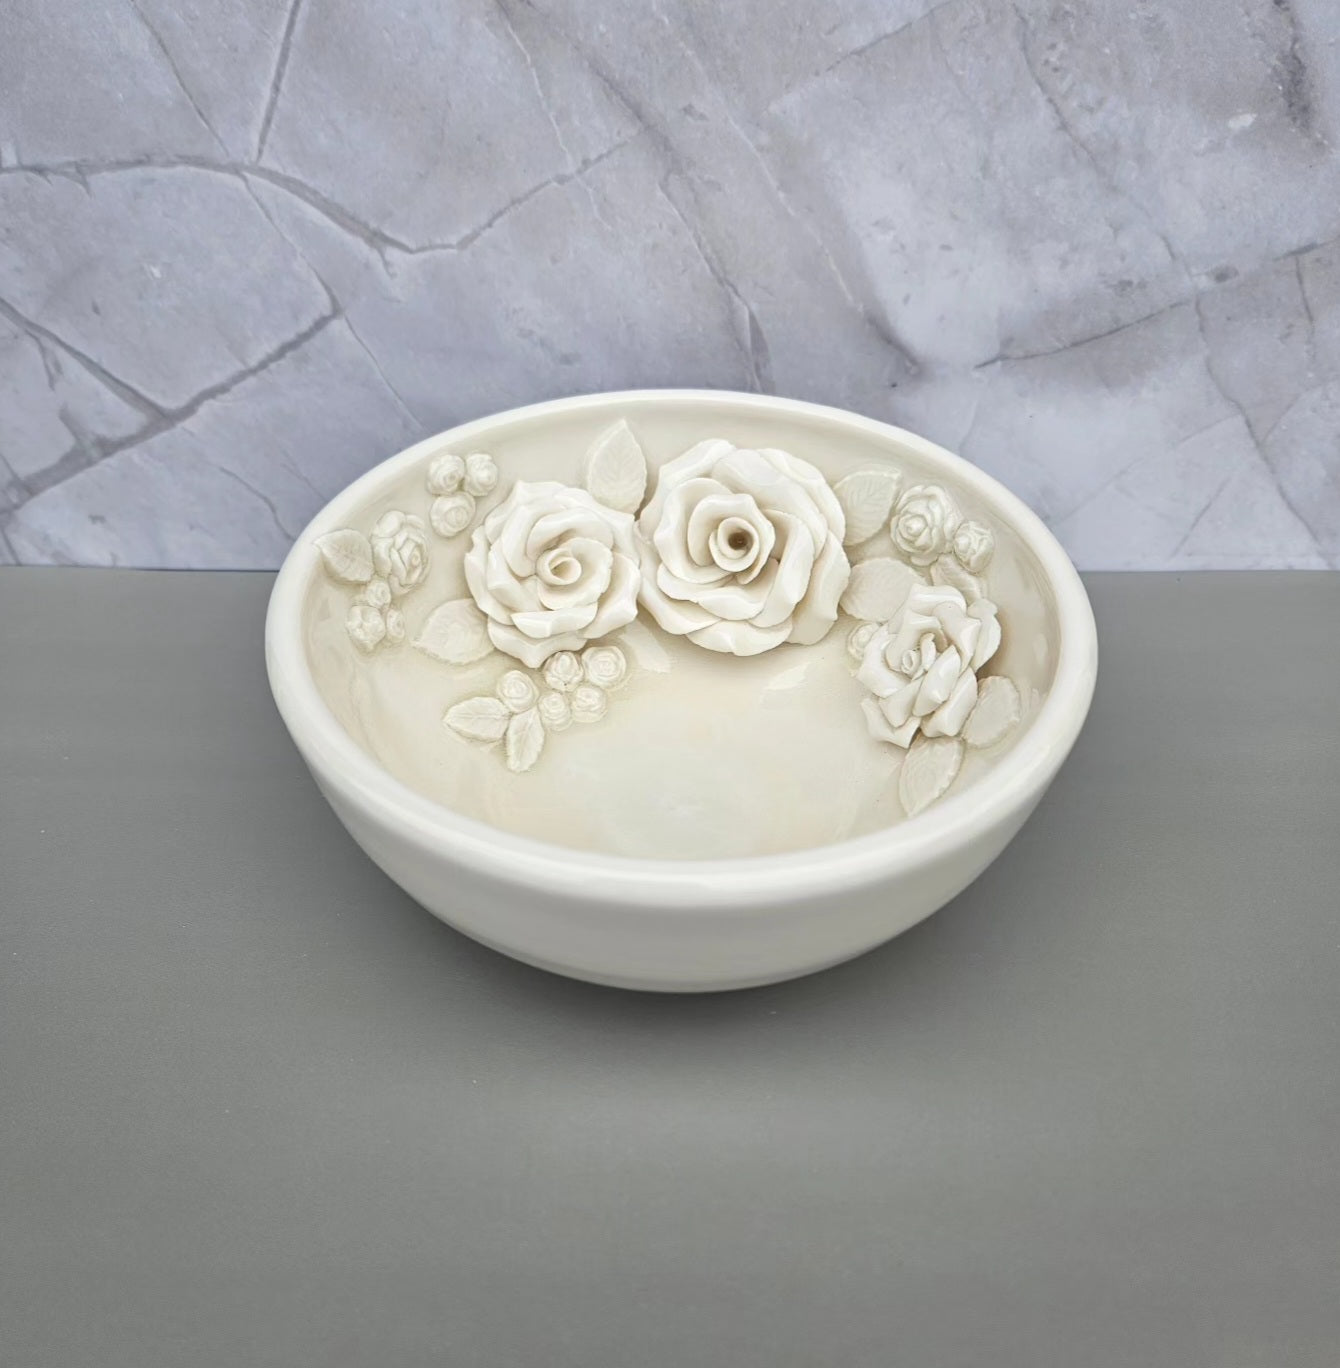 White frost shallow bowl with roses within the bowl. 6 inches wide, 3 inches deep.